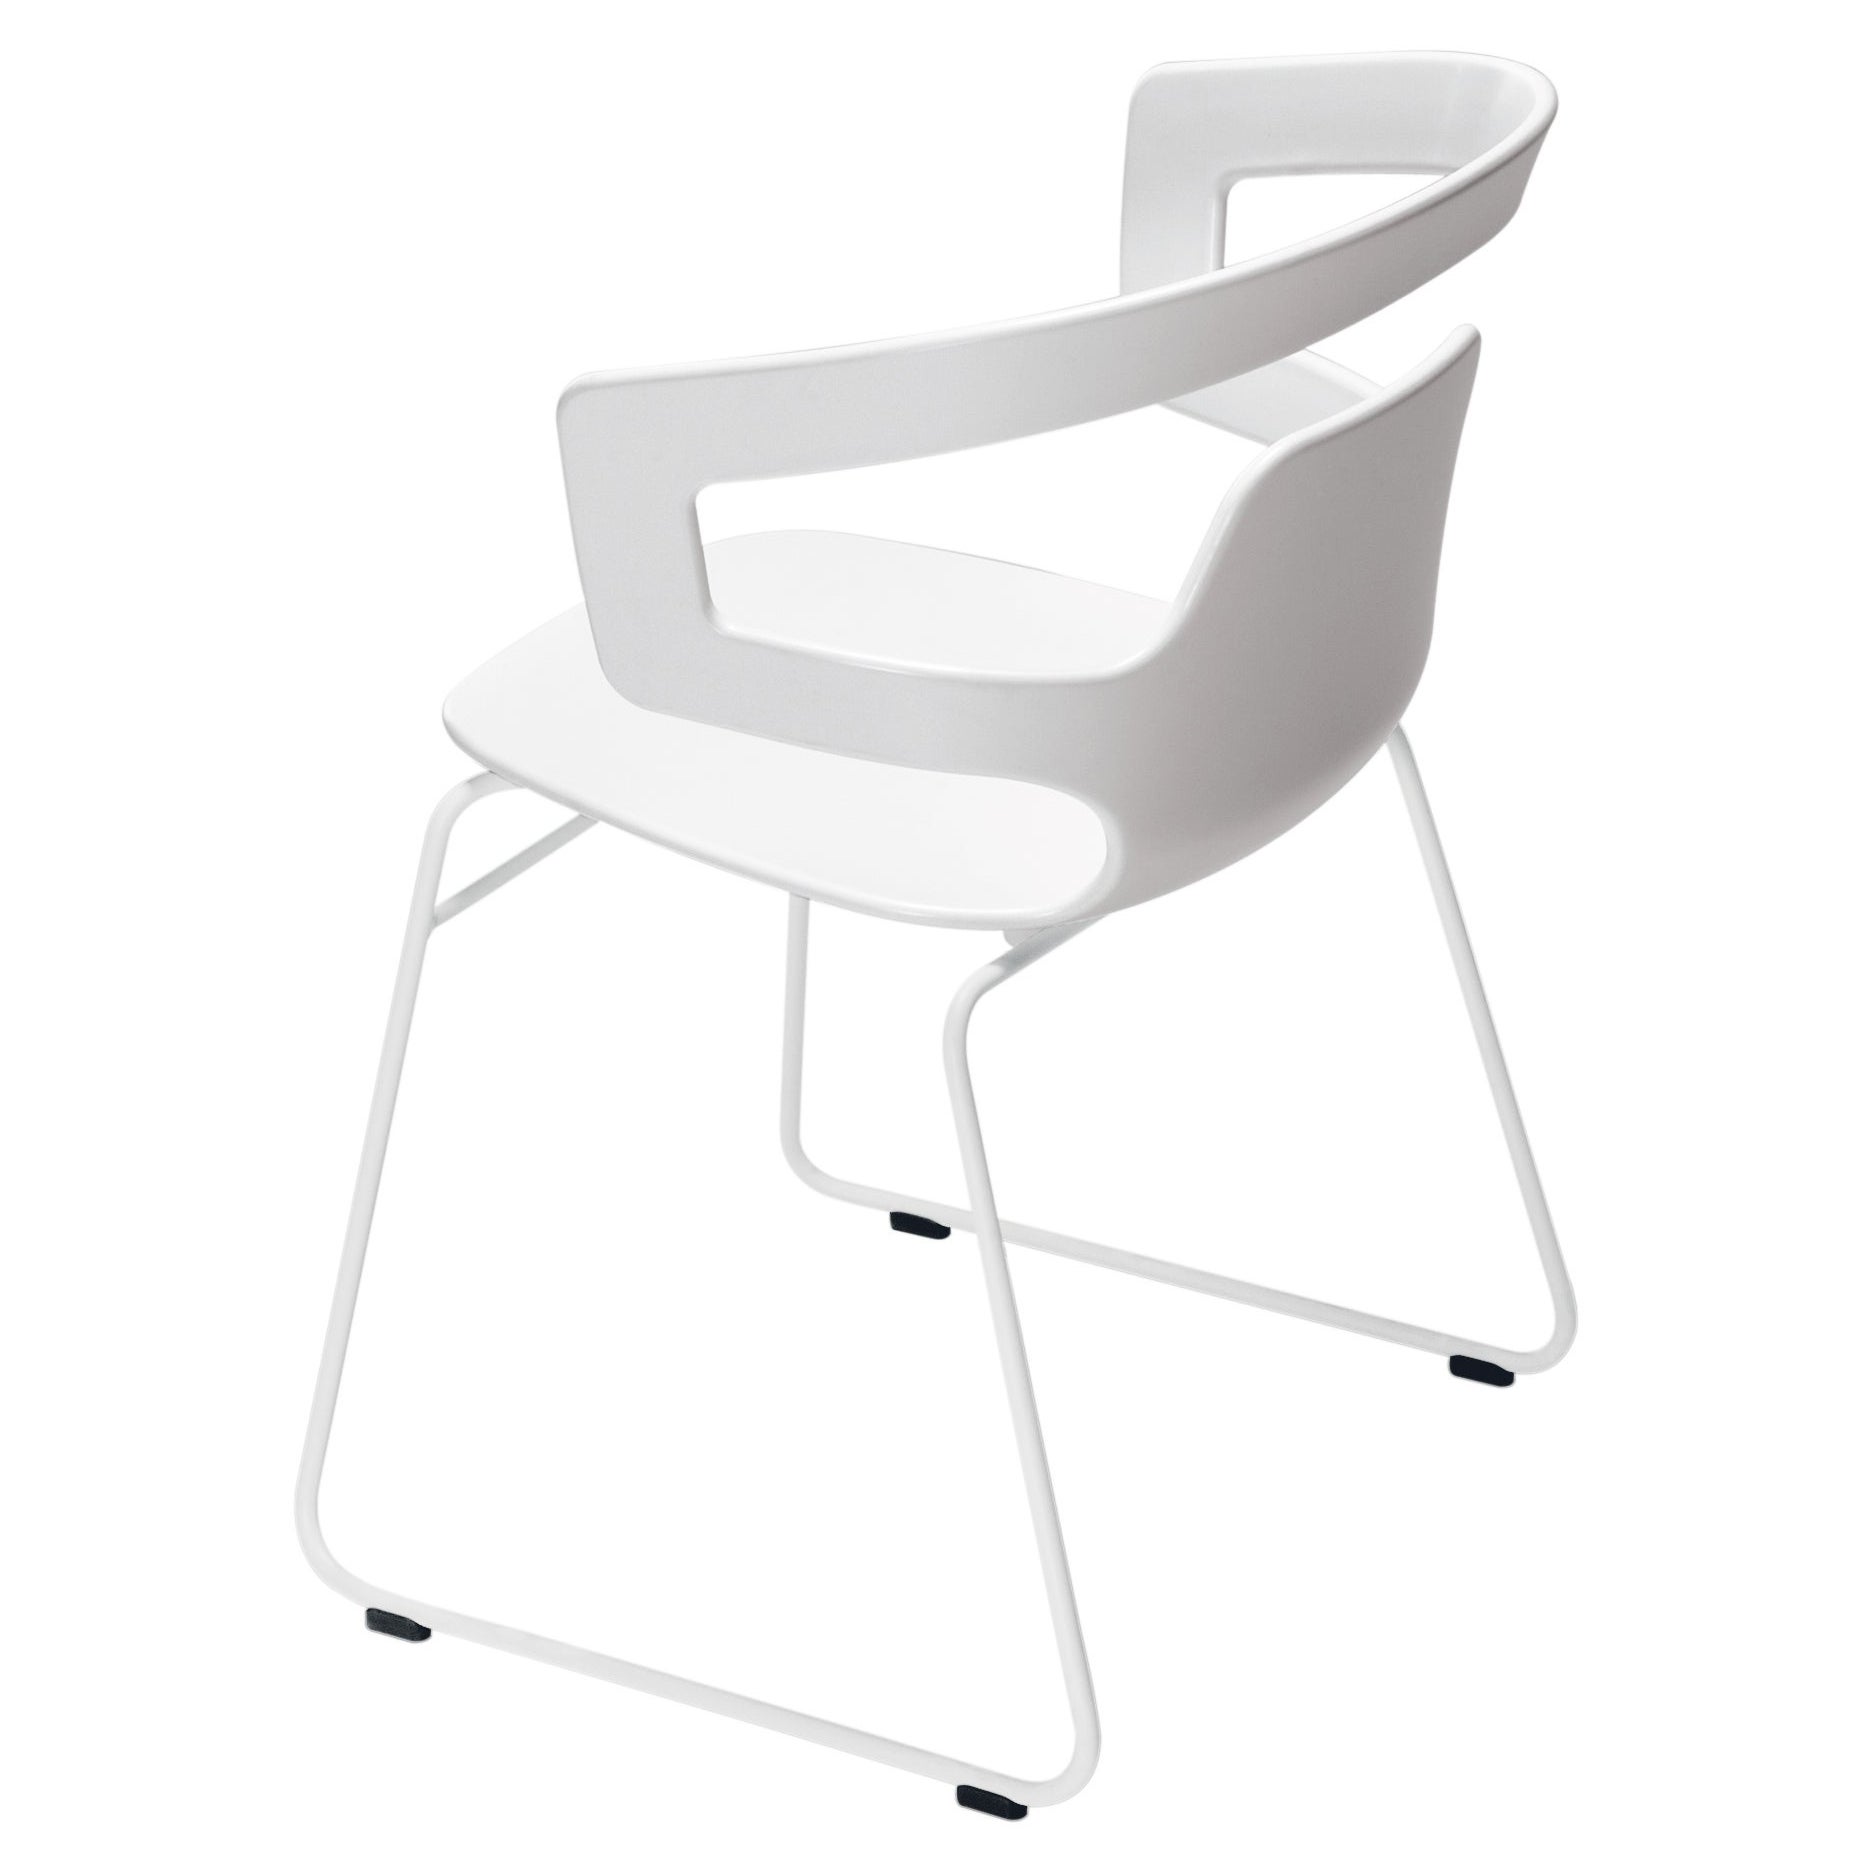 Alias 501 Segesta Sledge Chair in White Lacquered Steel Frame by Alfredo Häberli